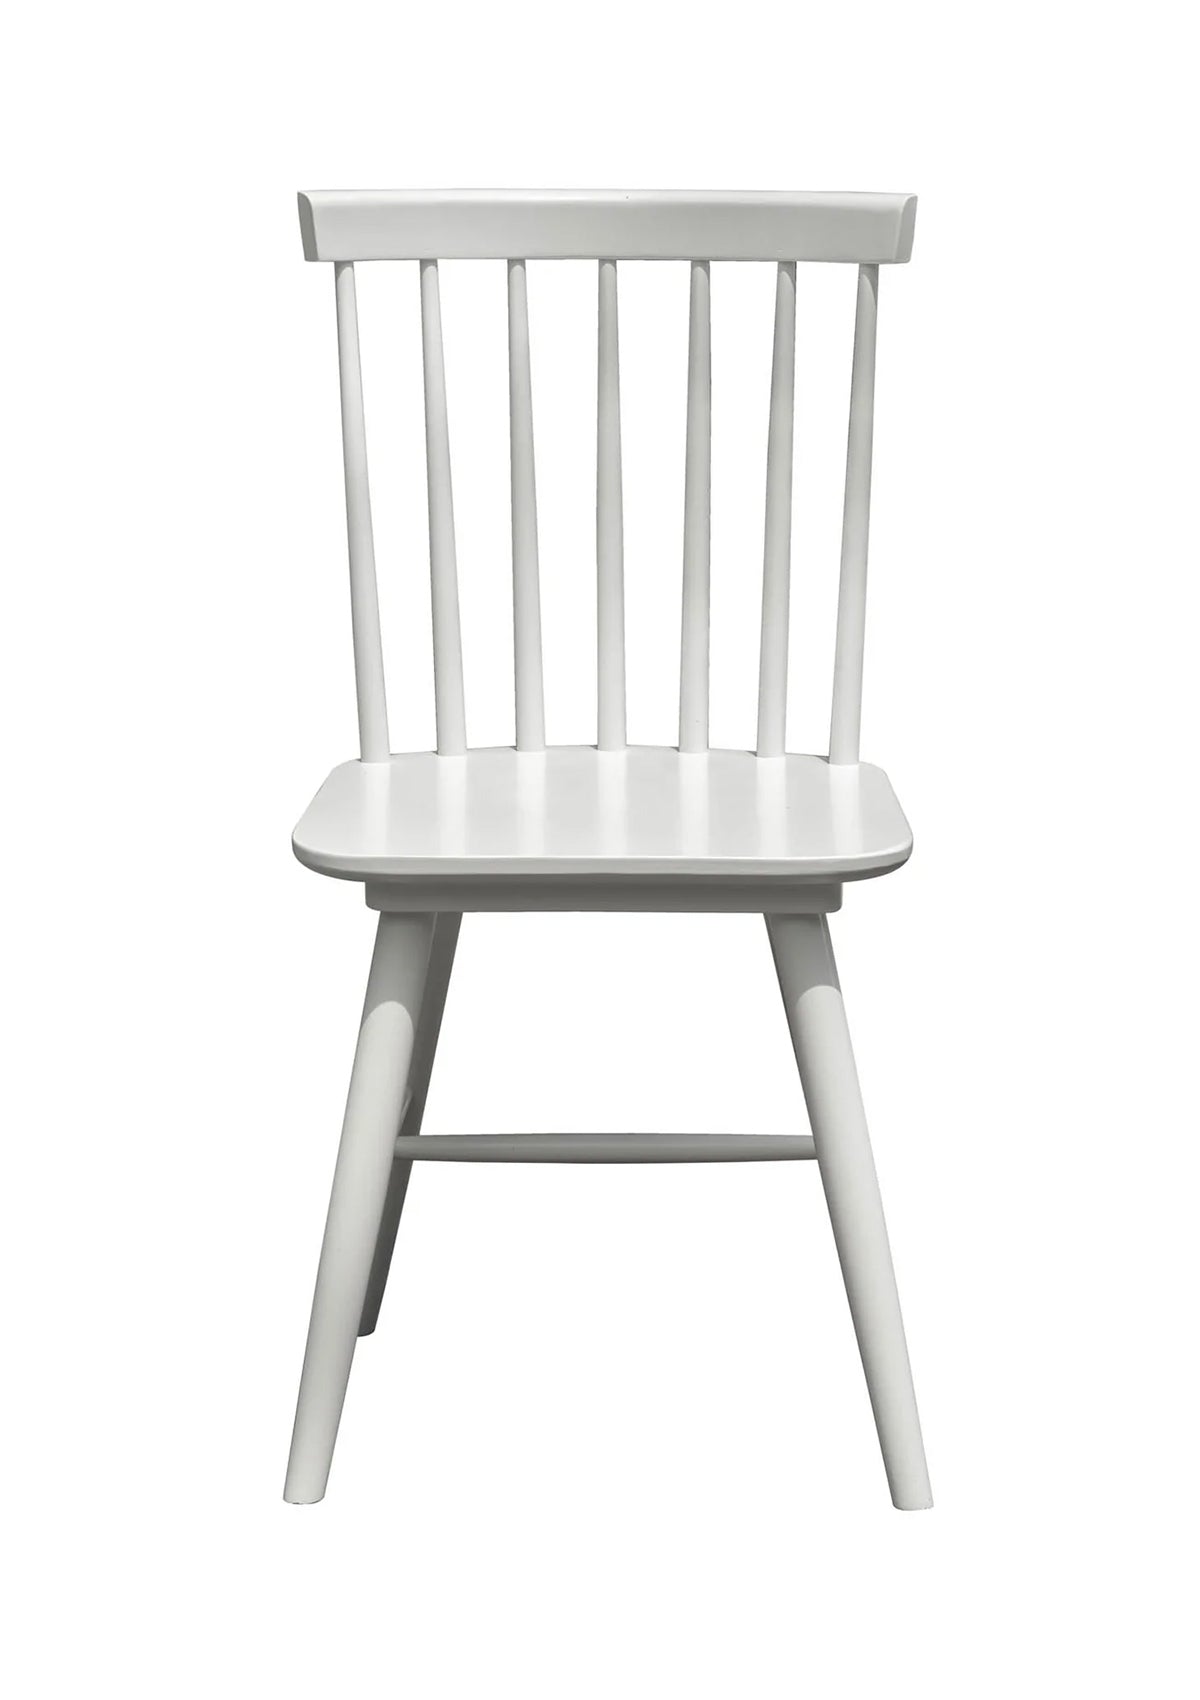 Easton Dining Chairs